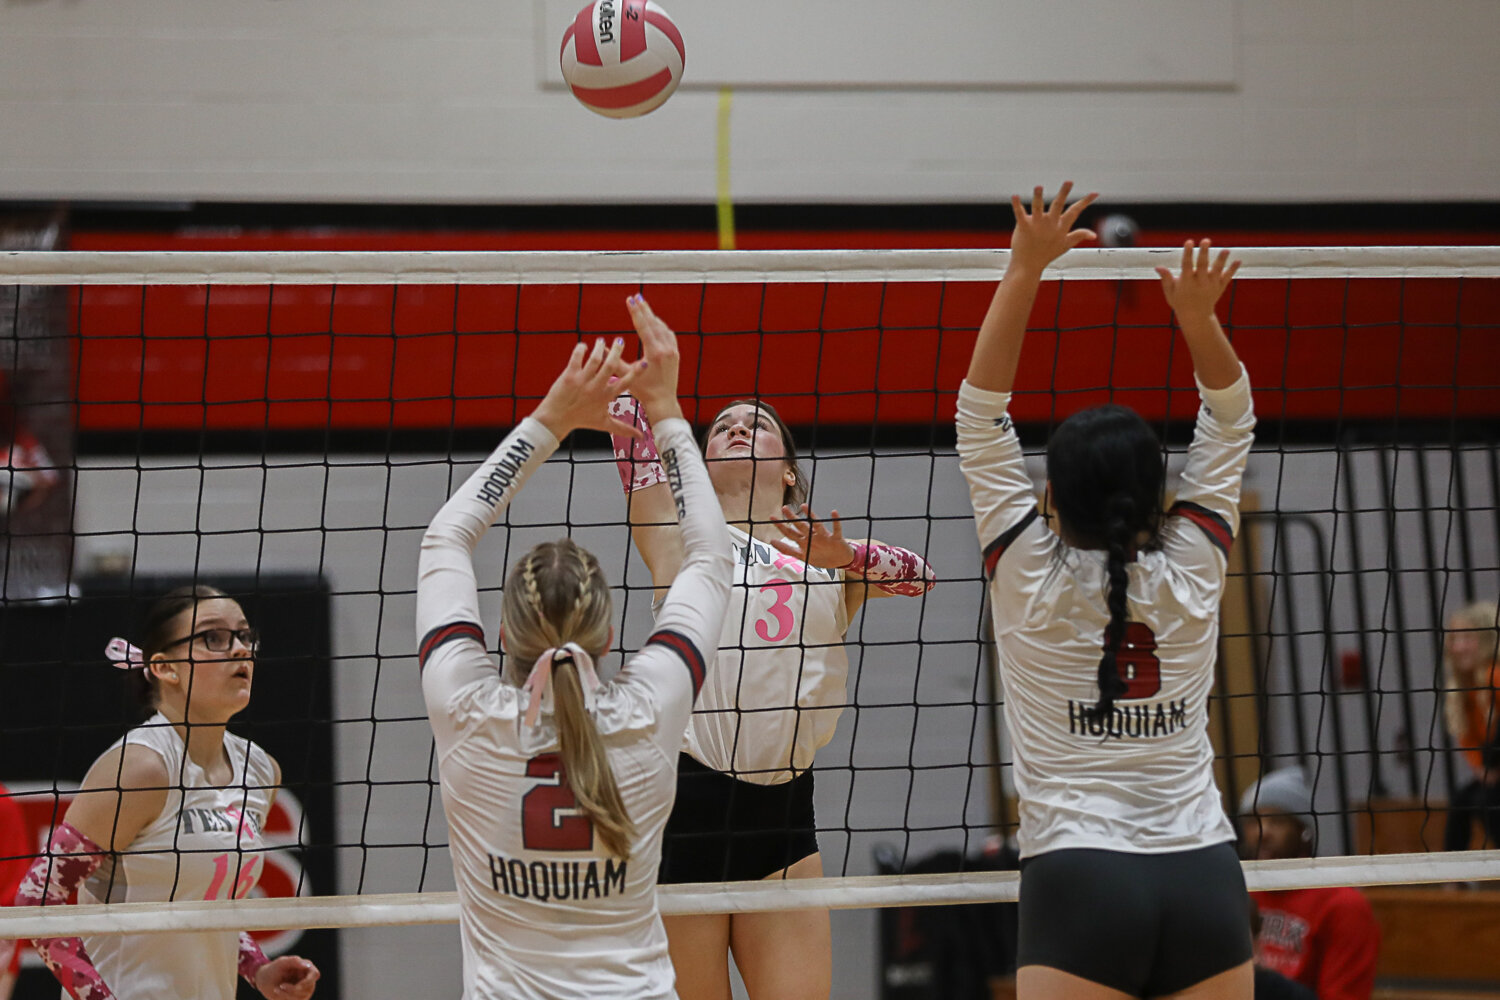 Brooke Bratton winds up to swing during Tenino's four-set loss to Hoquiam on Oct. 24.